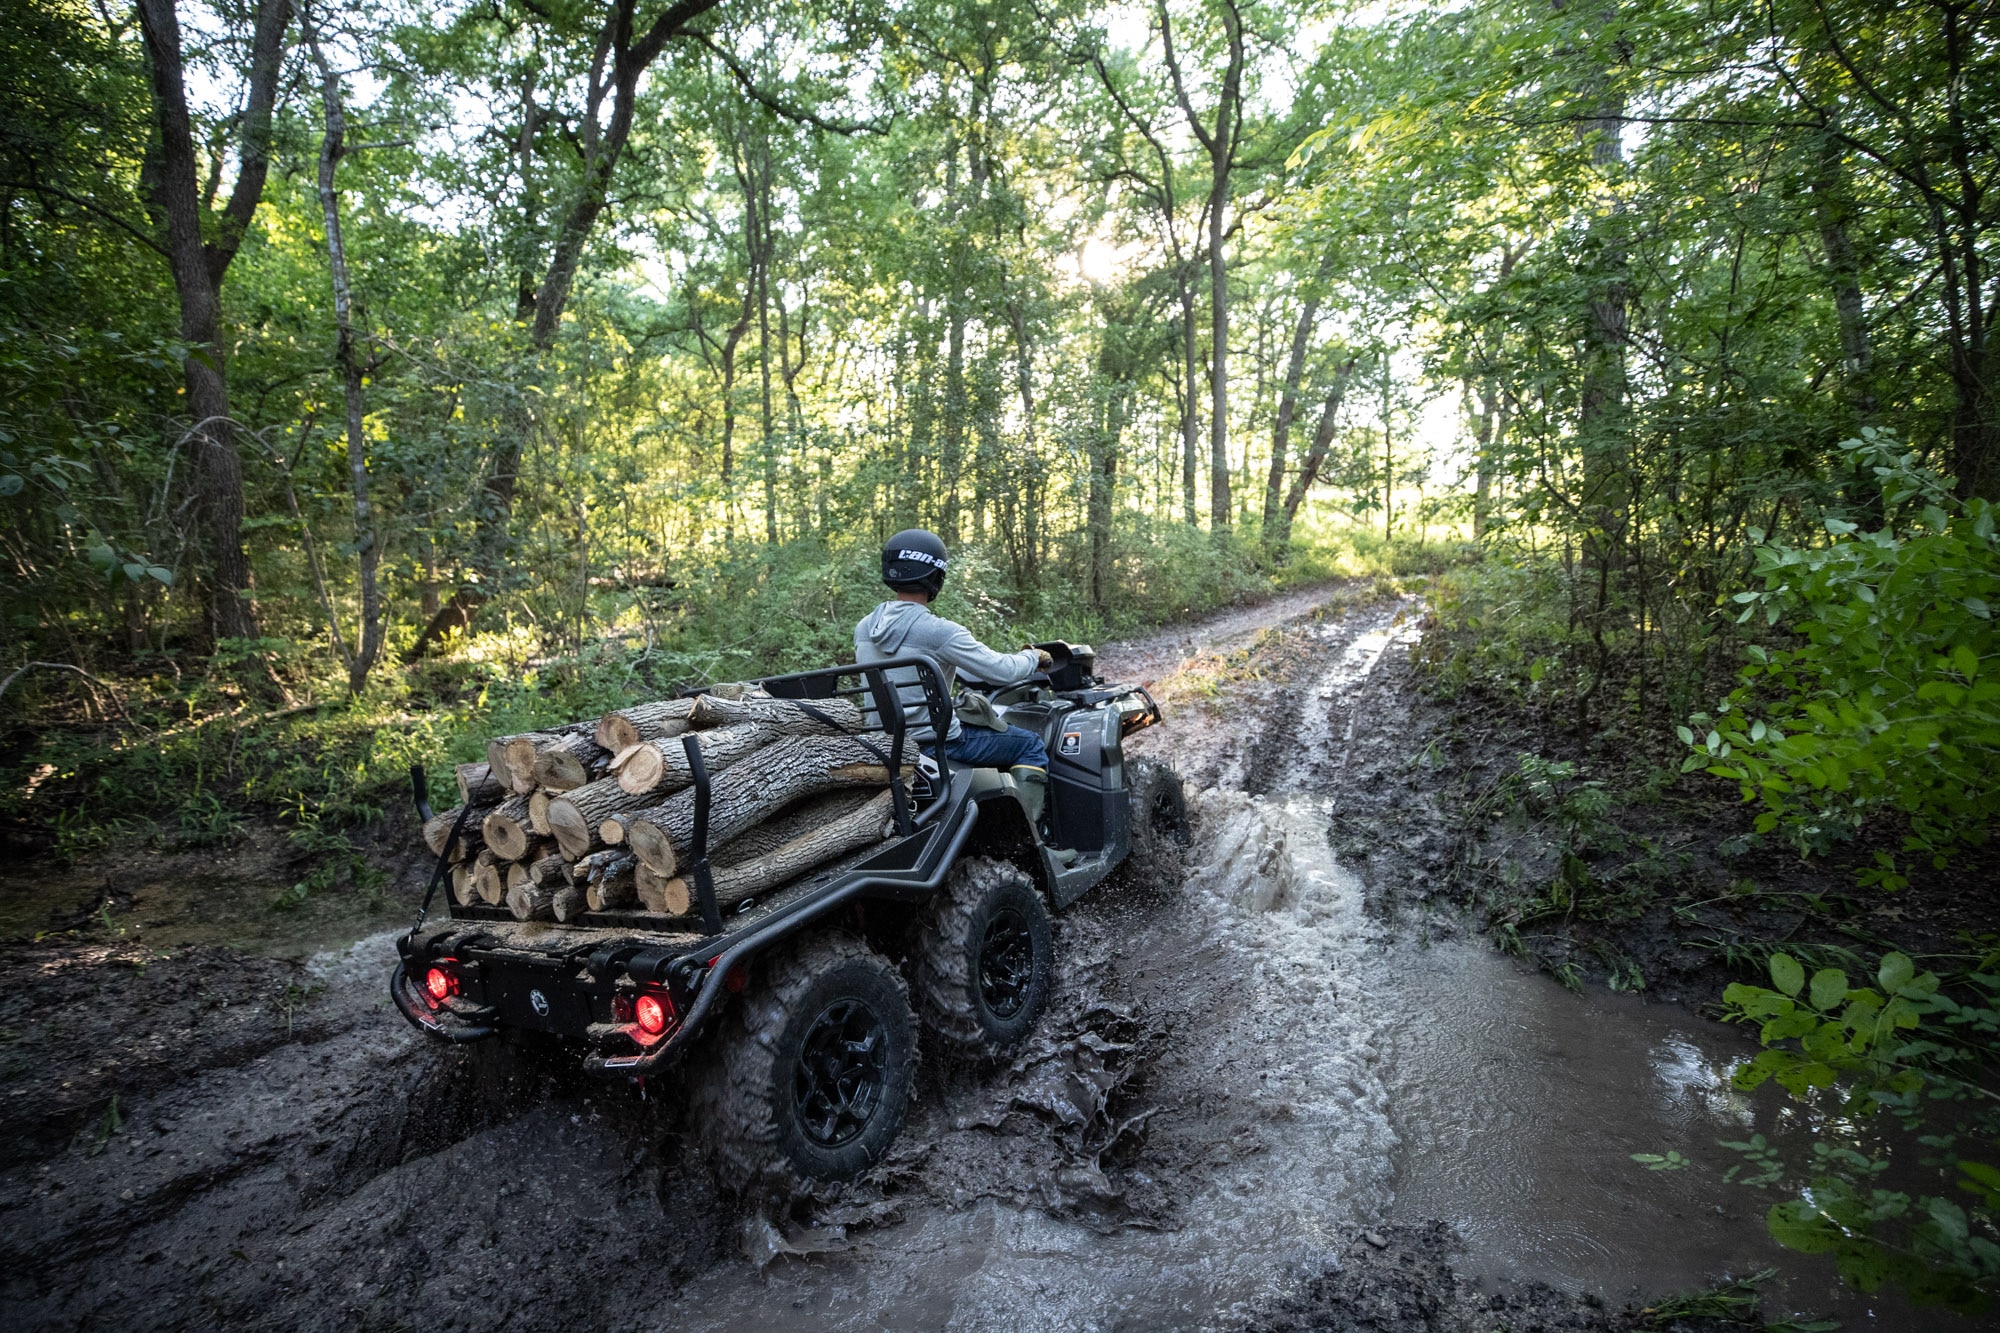 Man riding a Can-Am Outlander 6x6 ATV in the mud with wood in the rear rack